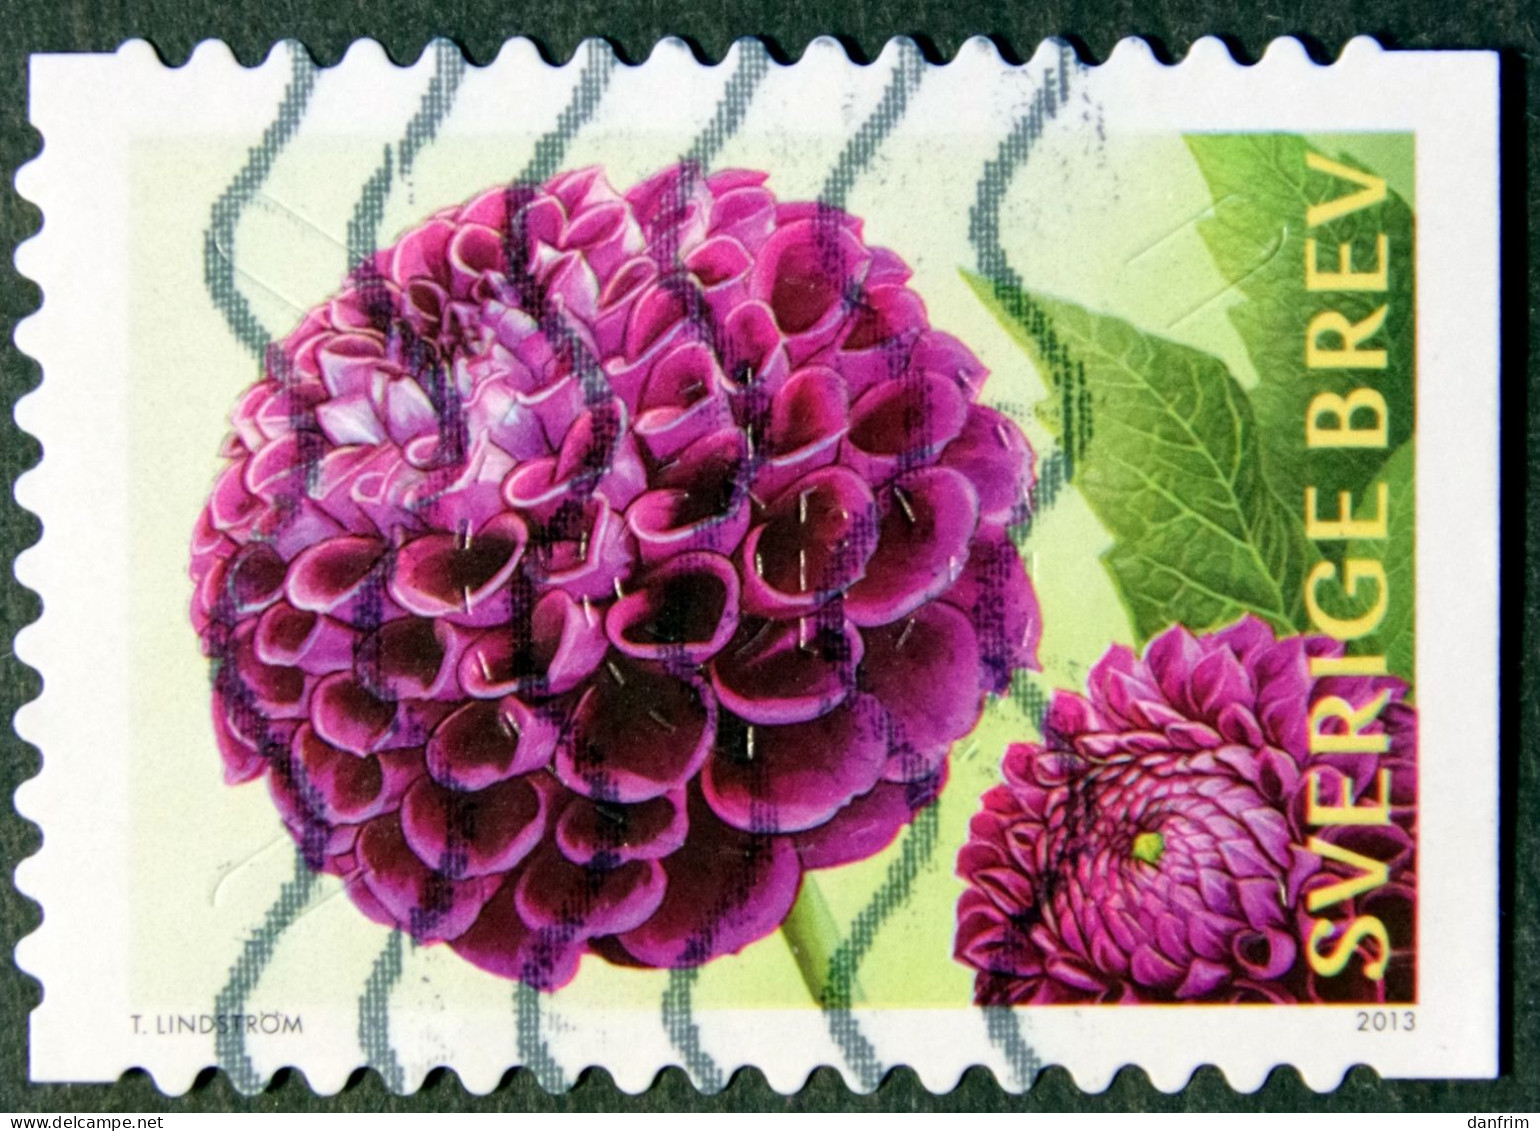 Sweden  2013 Flowers   MiNr.2946 (0)  ( Lot  D 2150  ) - Used Stamps